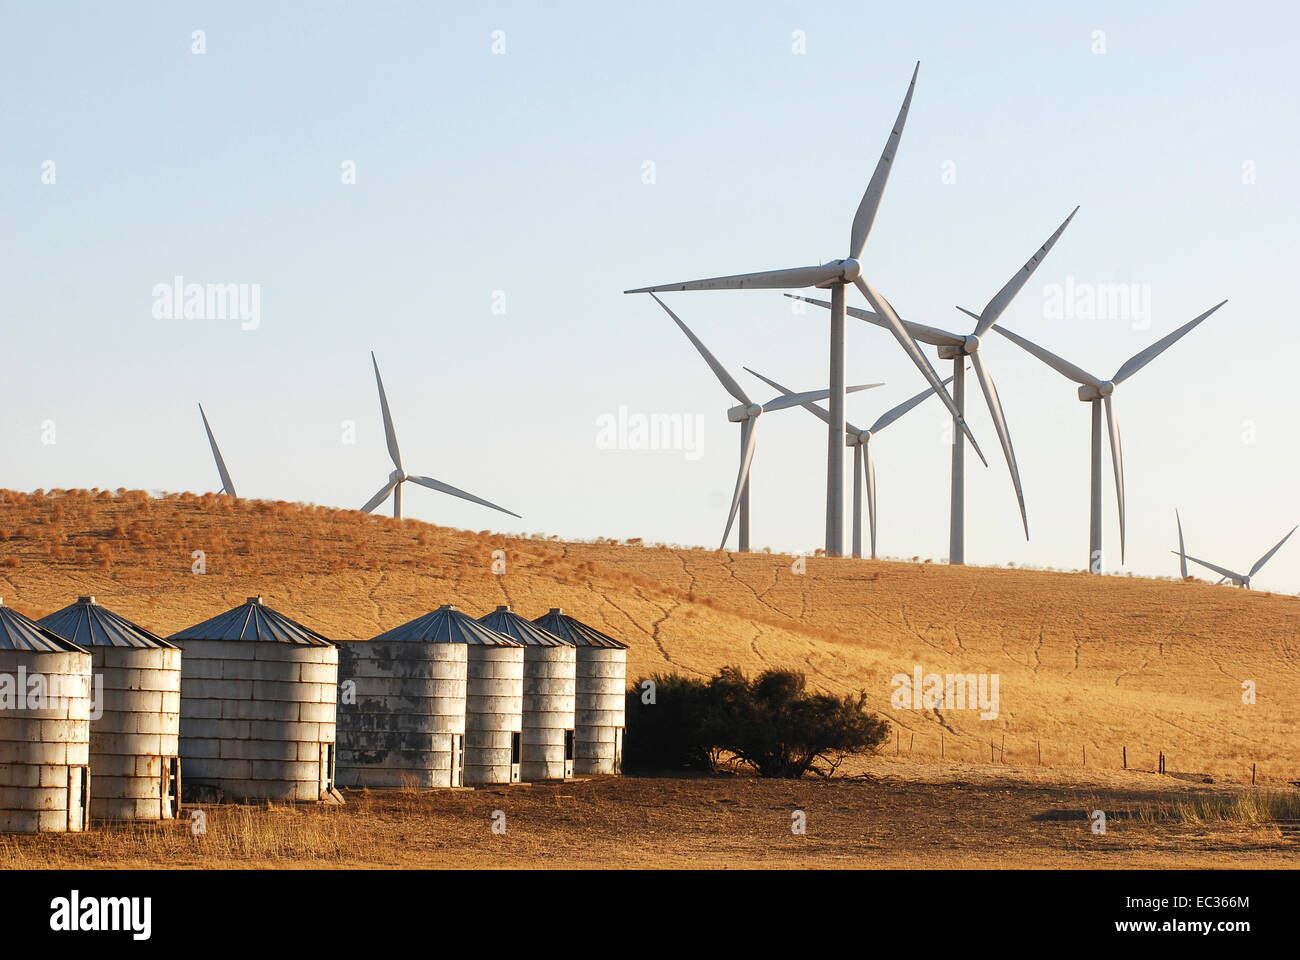 Wind farm with agricultural silos Stock Photo